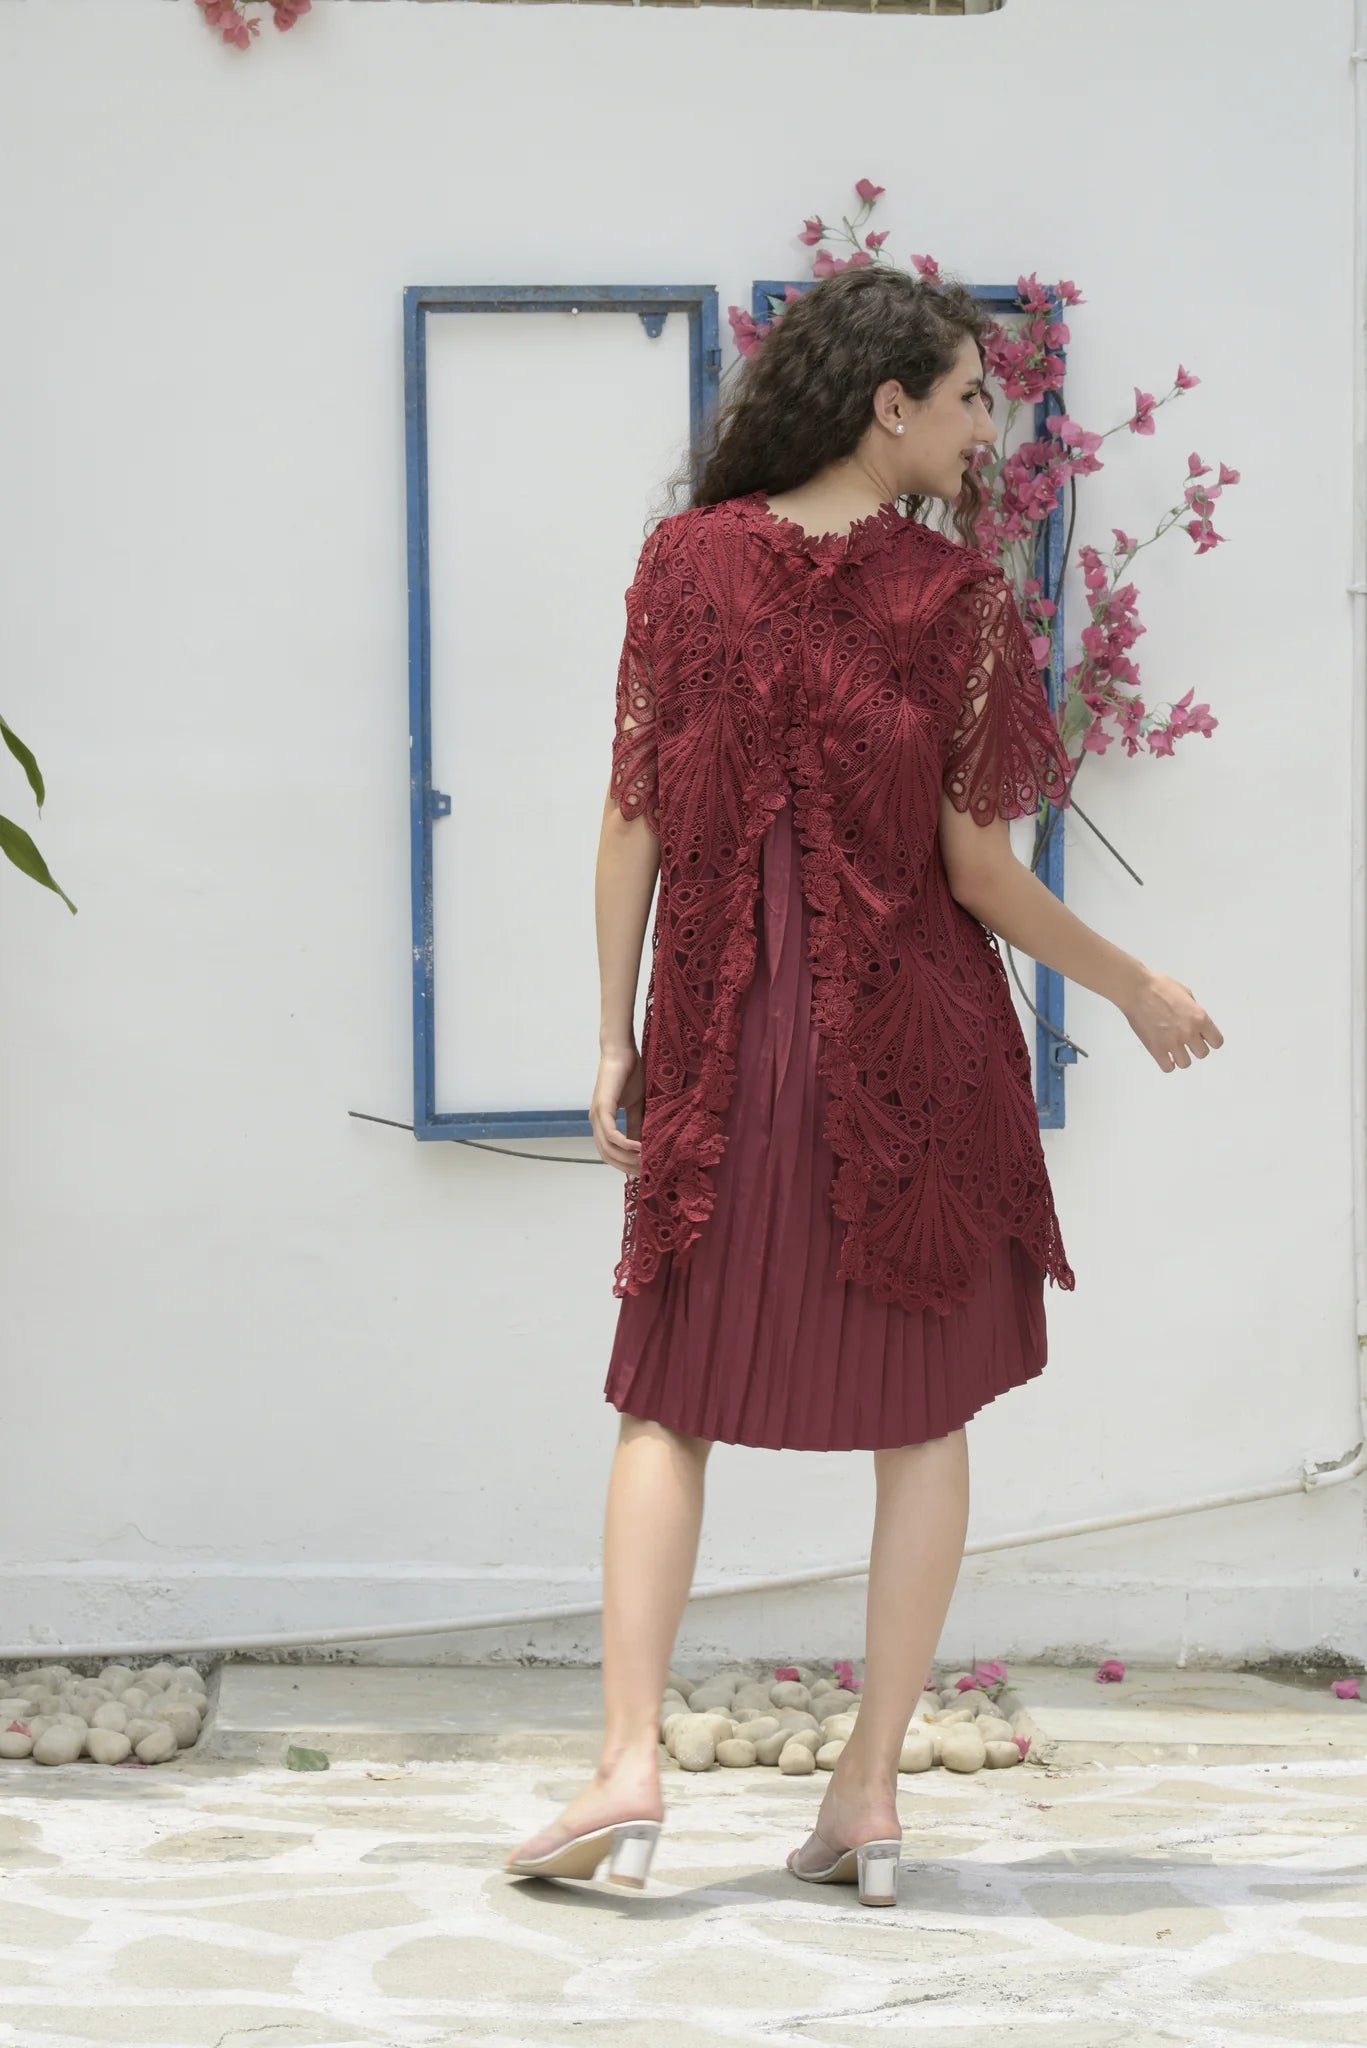 Image of Dazzle at your special event in the sensational MYRA Mesh Daylily Lace Dress! Crafted with exquisite lace detailing, this maroon stunner is guaranteed to make heads turn. With lightweight comfort and an elegant silhouette, you'll love the luxurious look and feel. So go ahead, make your grand entrance! From savoirfashions.com